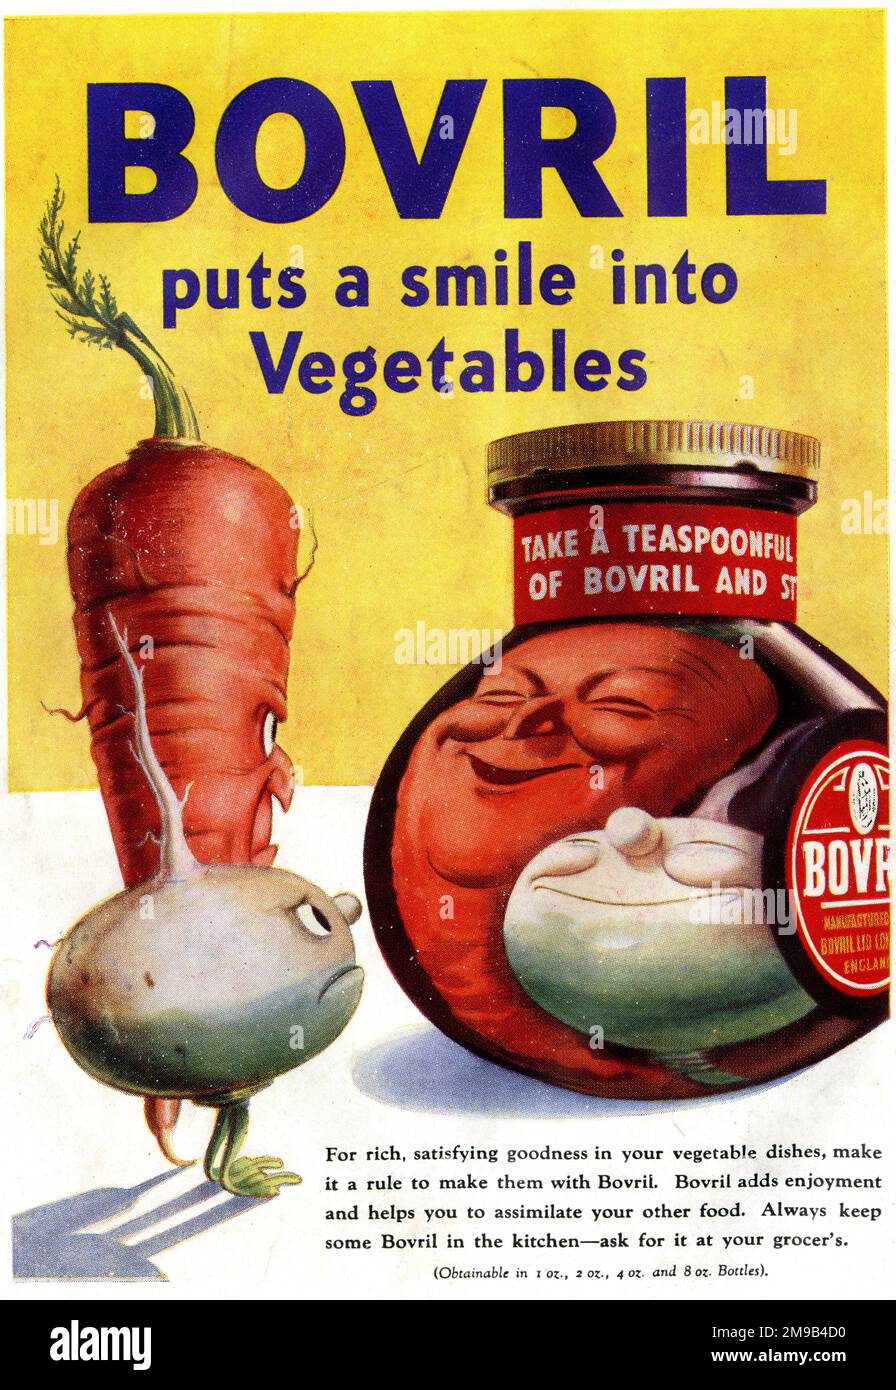 Advert for Bovril - puts a smile into vegetables, WW2 Stock Photo